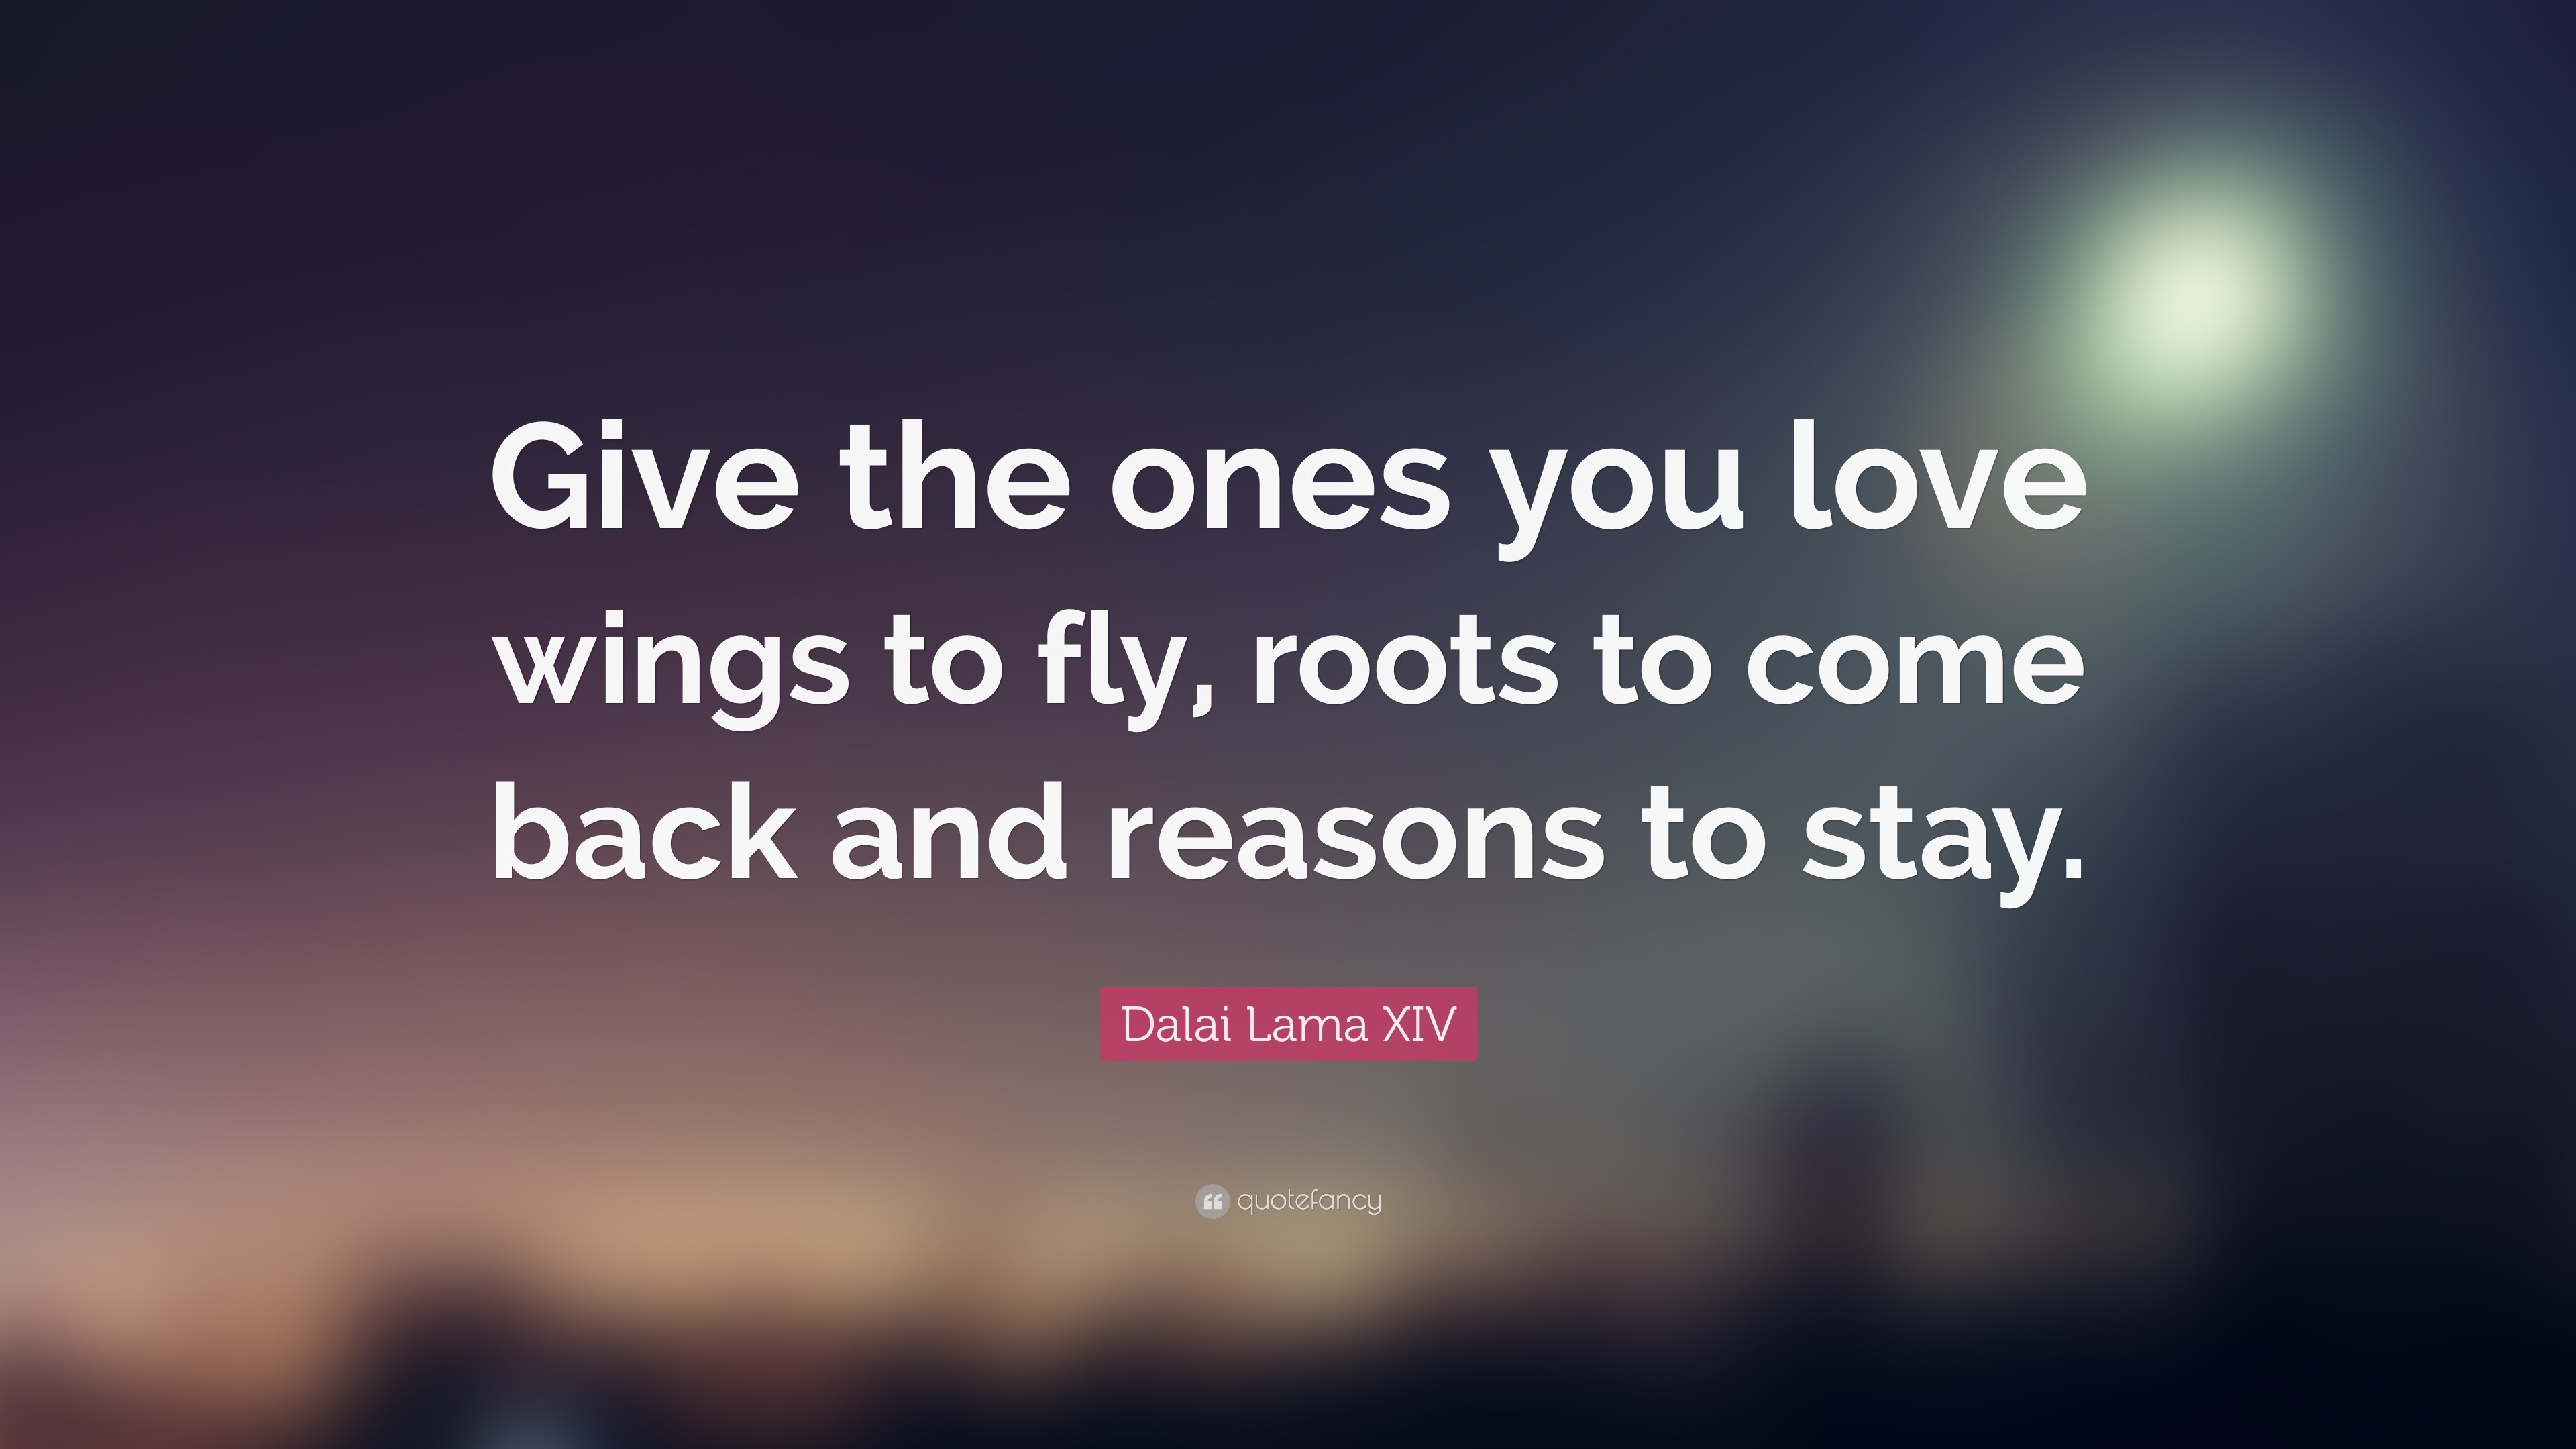 Dalai Lama XIV Quote: "Give the ones you love wings to fly, roots to come back and reasons to ...